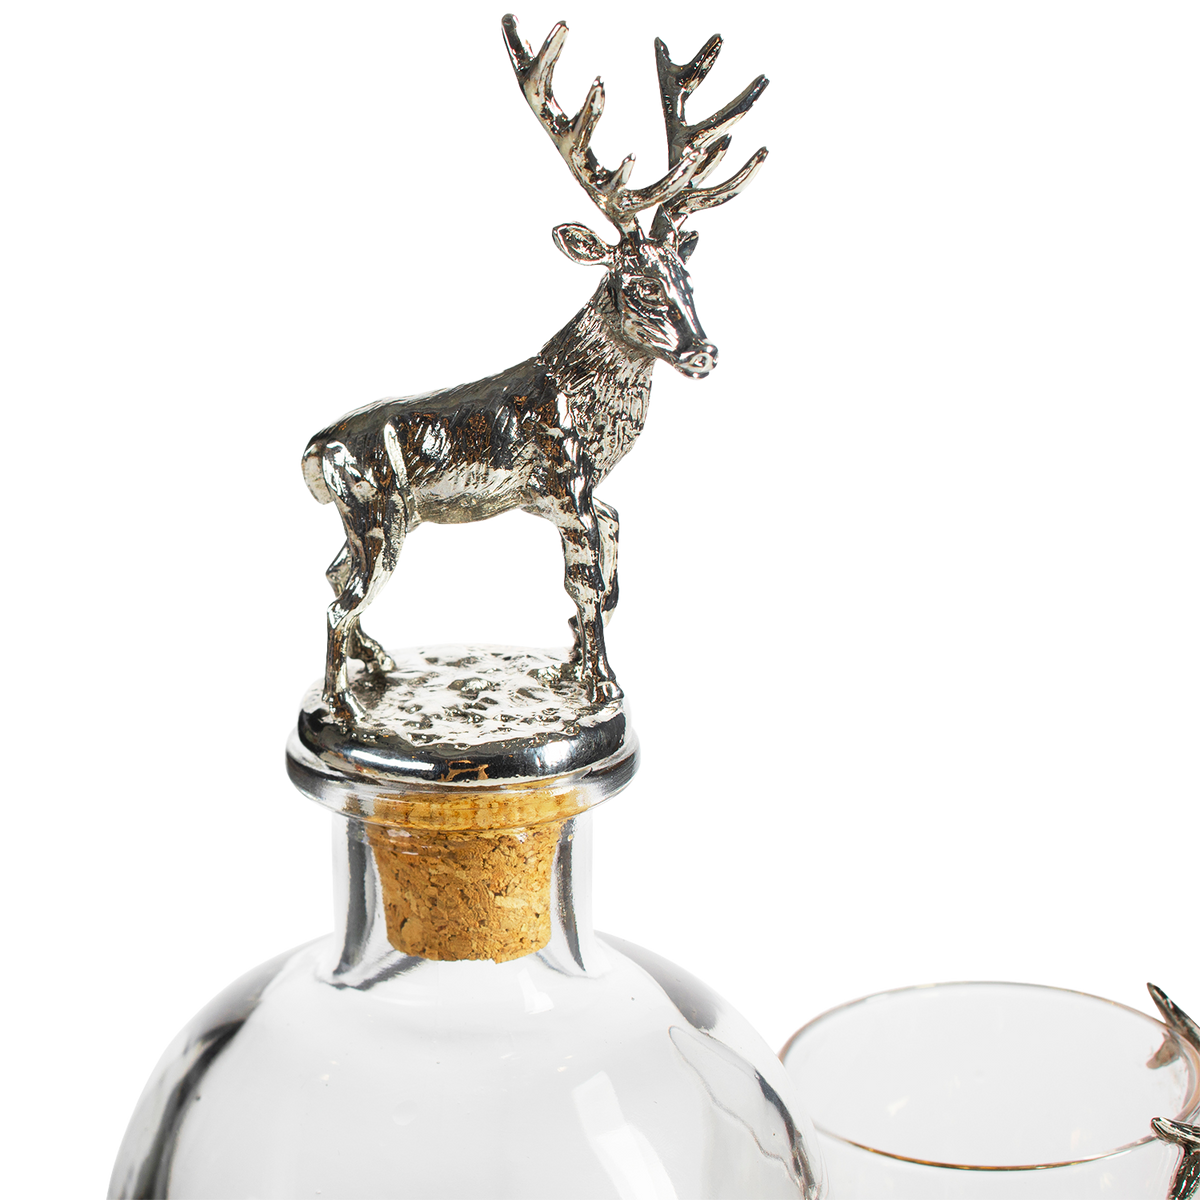 Stag Antler Decanter Set with 2 Stag Glasses - Antique Pewter Whiskey Decanter Set 25 Oz - Macchiaco